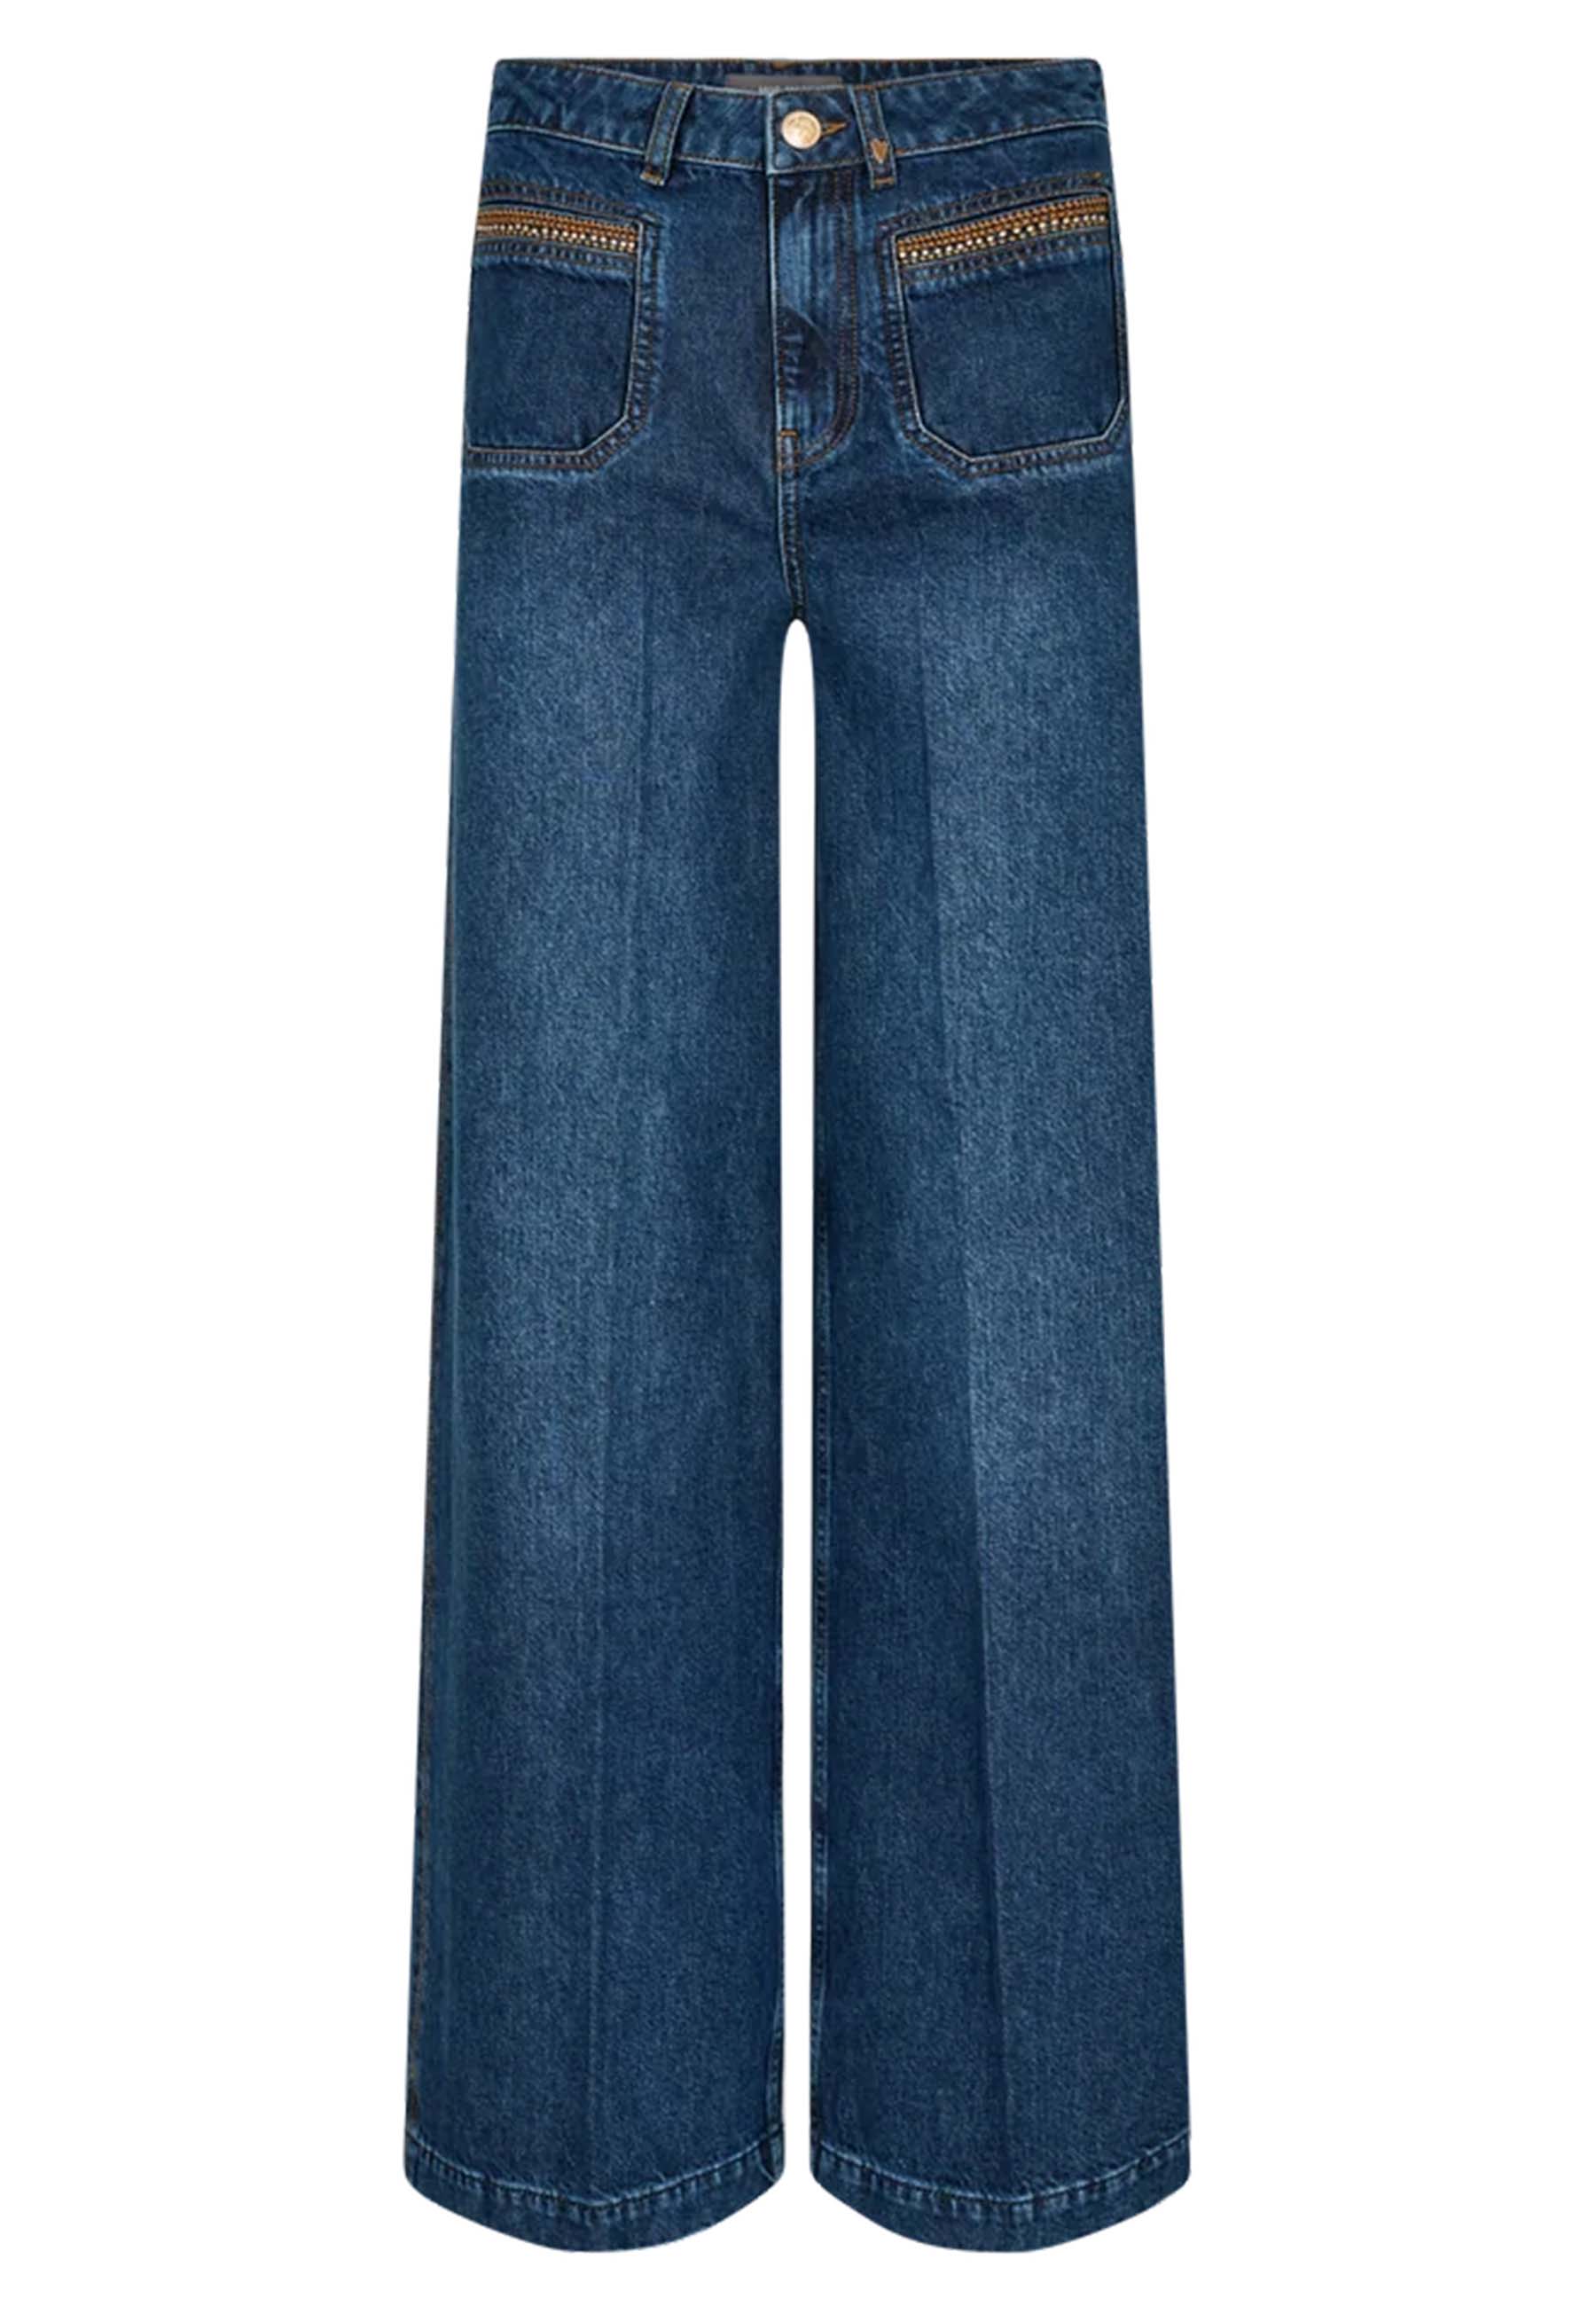 Mos Mosh flared jeans blauw Dames maat 31